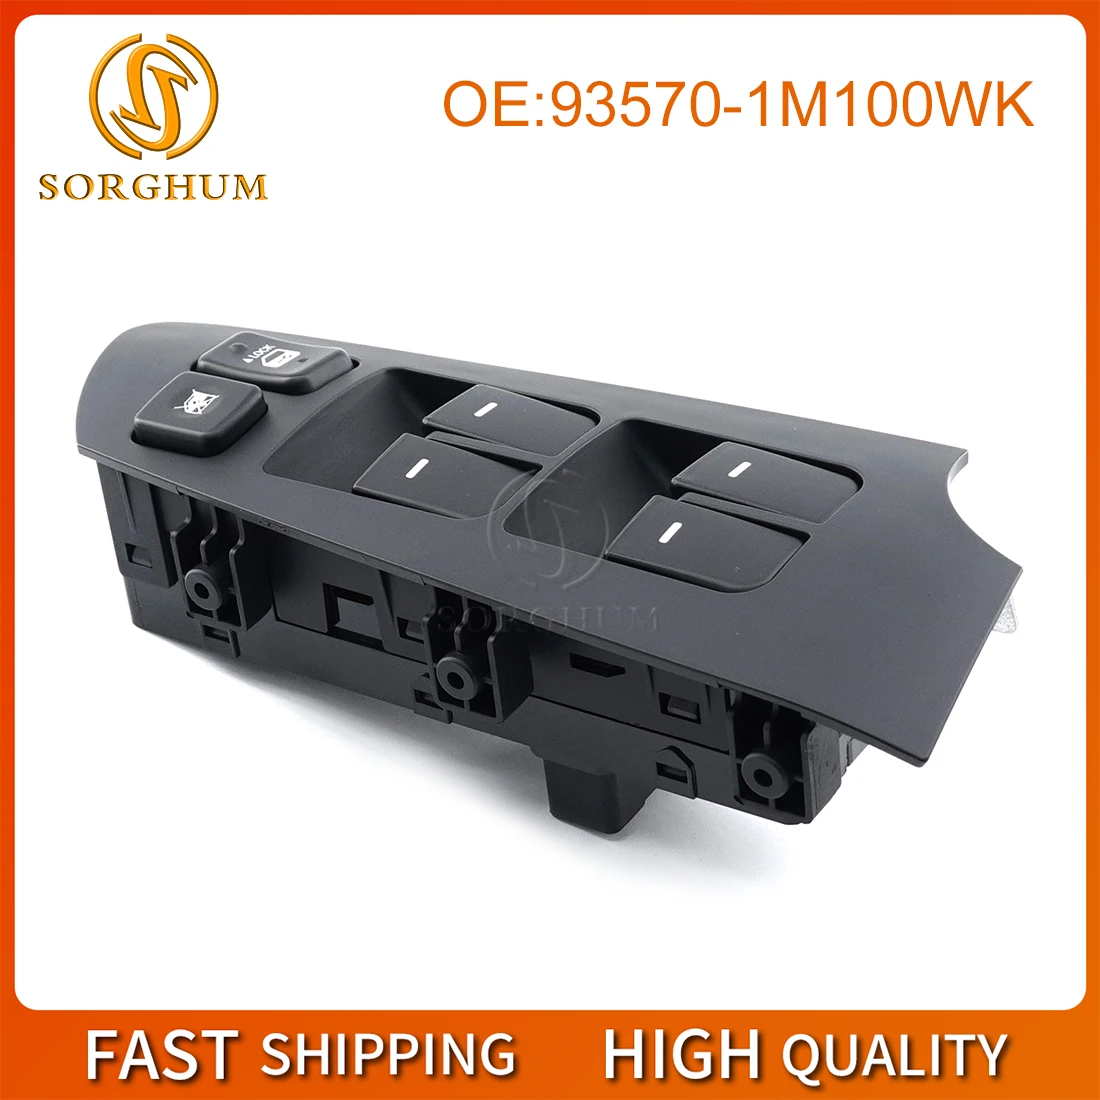 

Sorghum 93570-1M100WK Front Left Power Window Lifter Switch For Hyundai For Kia Forte Cerato 2010-2013 93570-1M100 935701M100